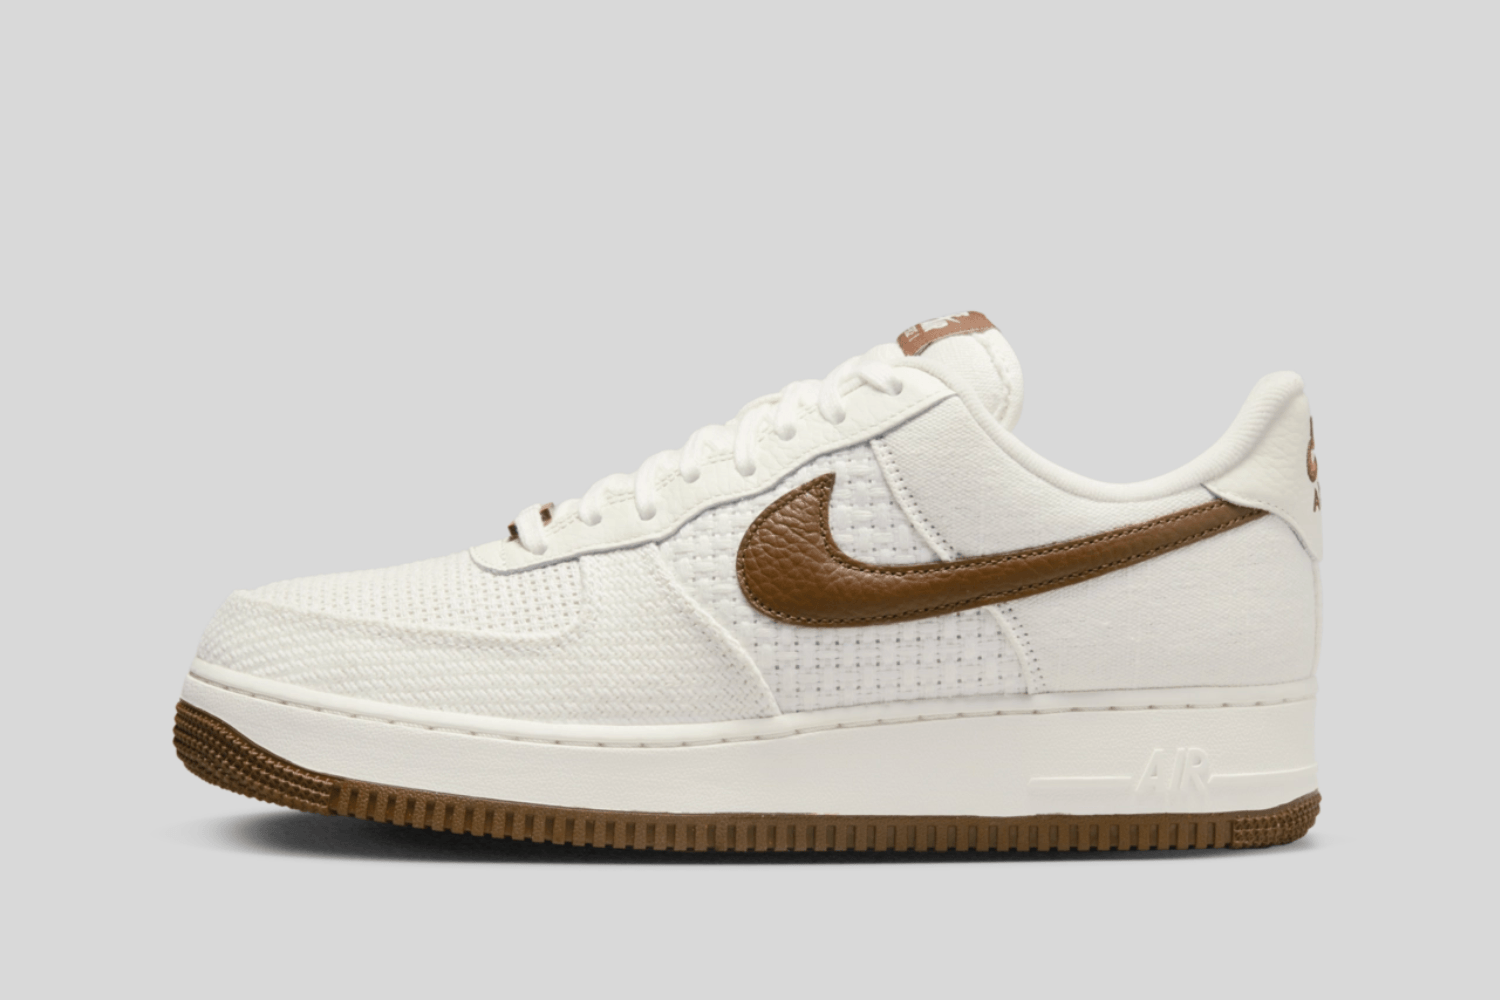 Nike Air Force 1 Low release in celebration of 5 years SNKRS app